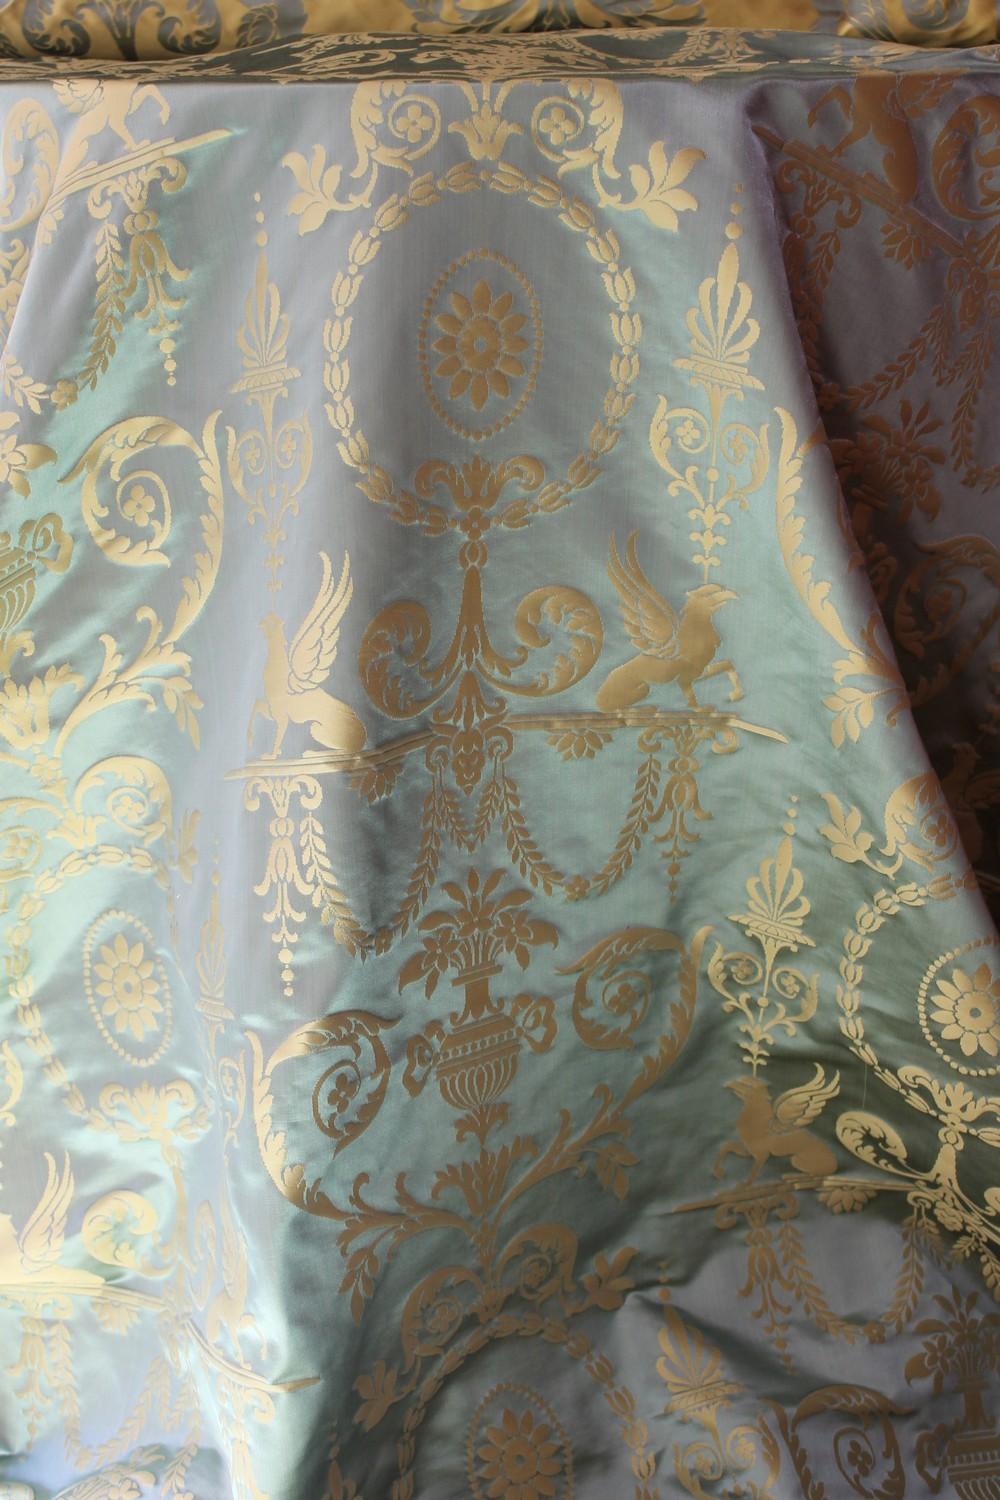 20th Century Italian Pure Silk Damask Fabric in Light Blue and Gold with Neoclassical Design